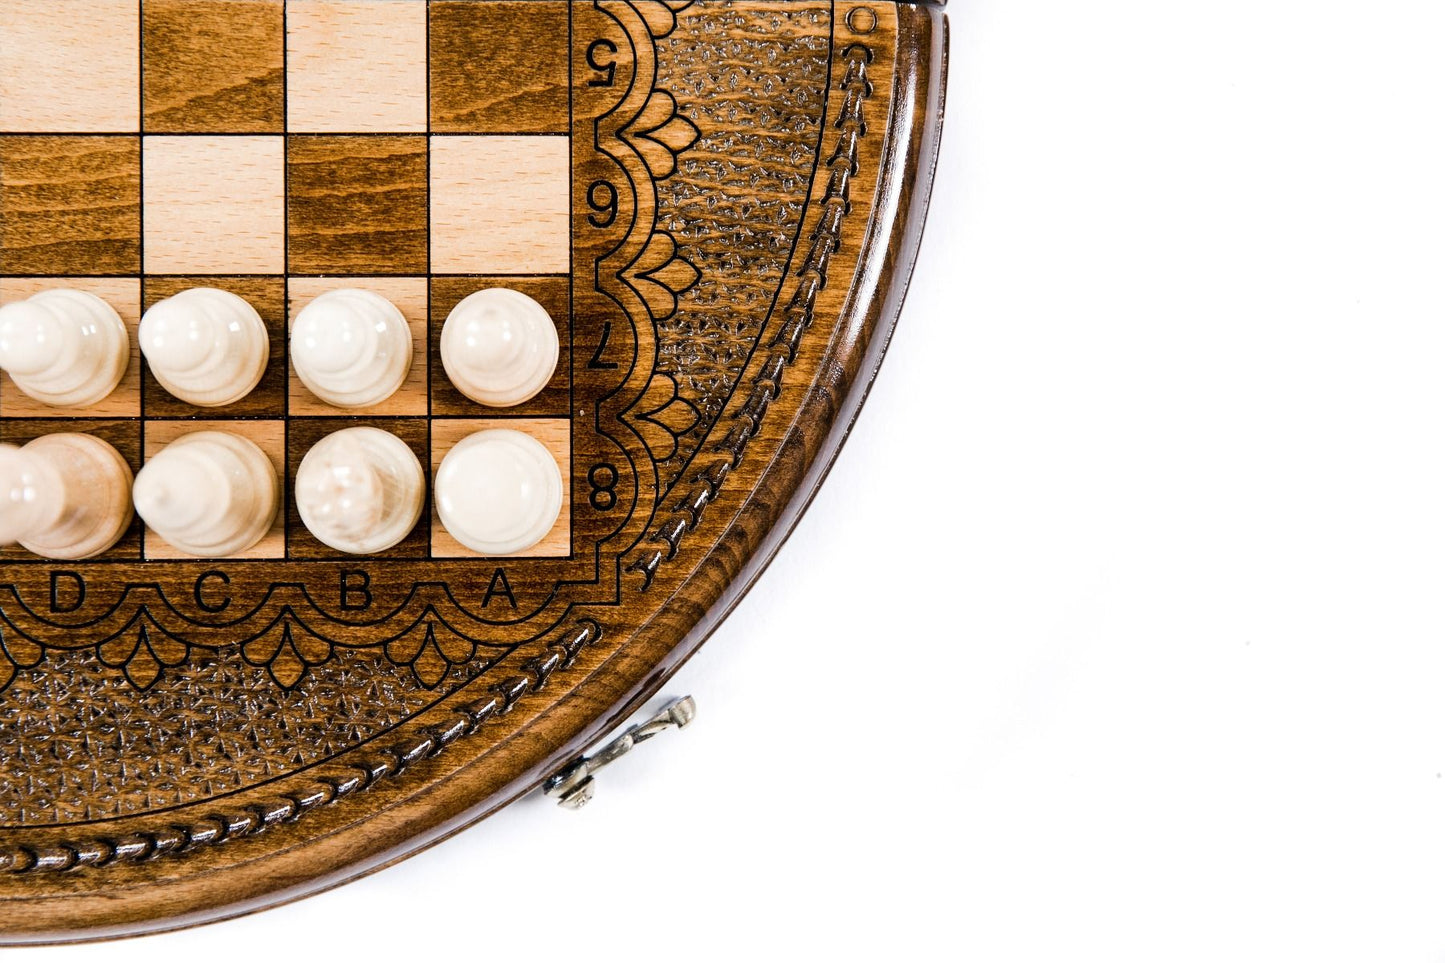 Master the game on a board that reimagines chess, combining the richness of wooden craftsmanship with innovative round design.